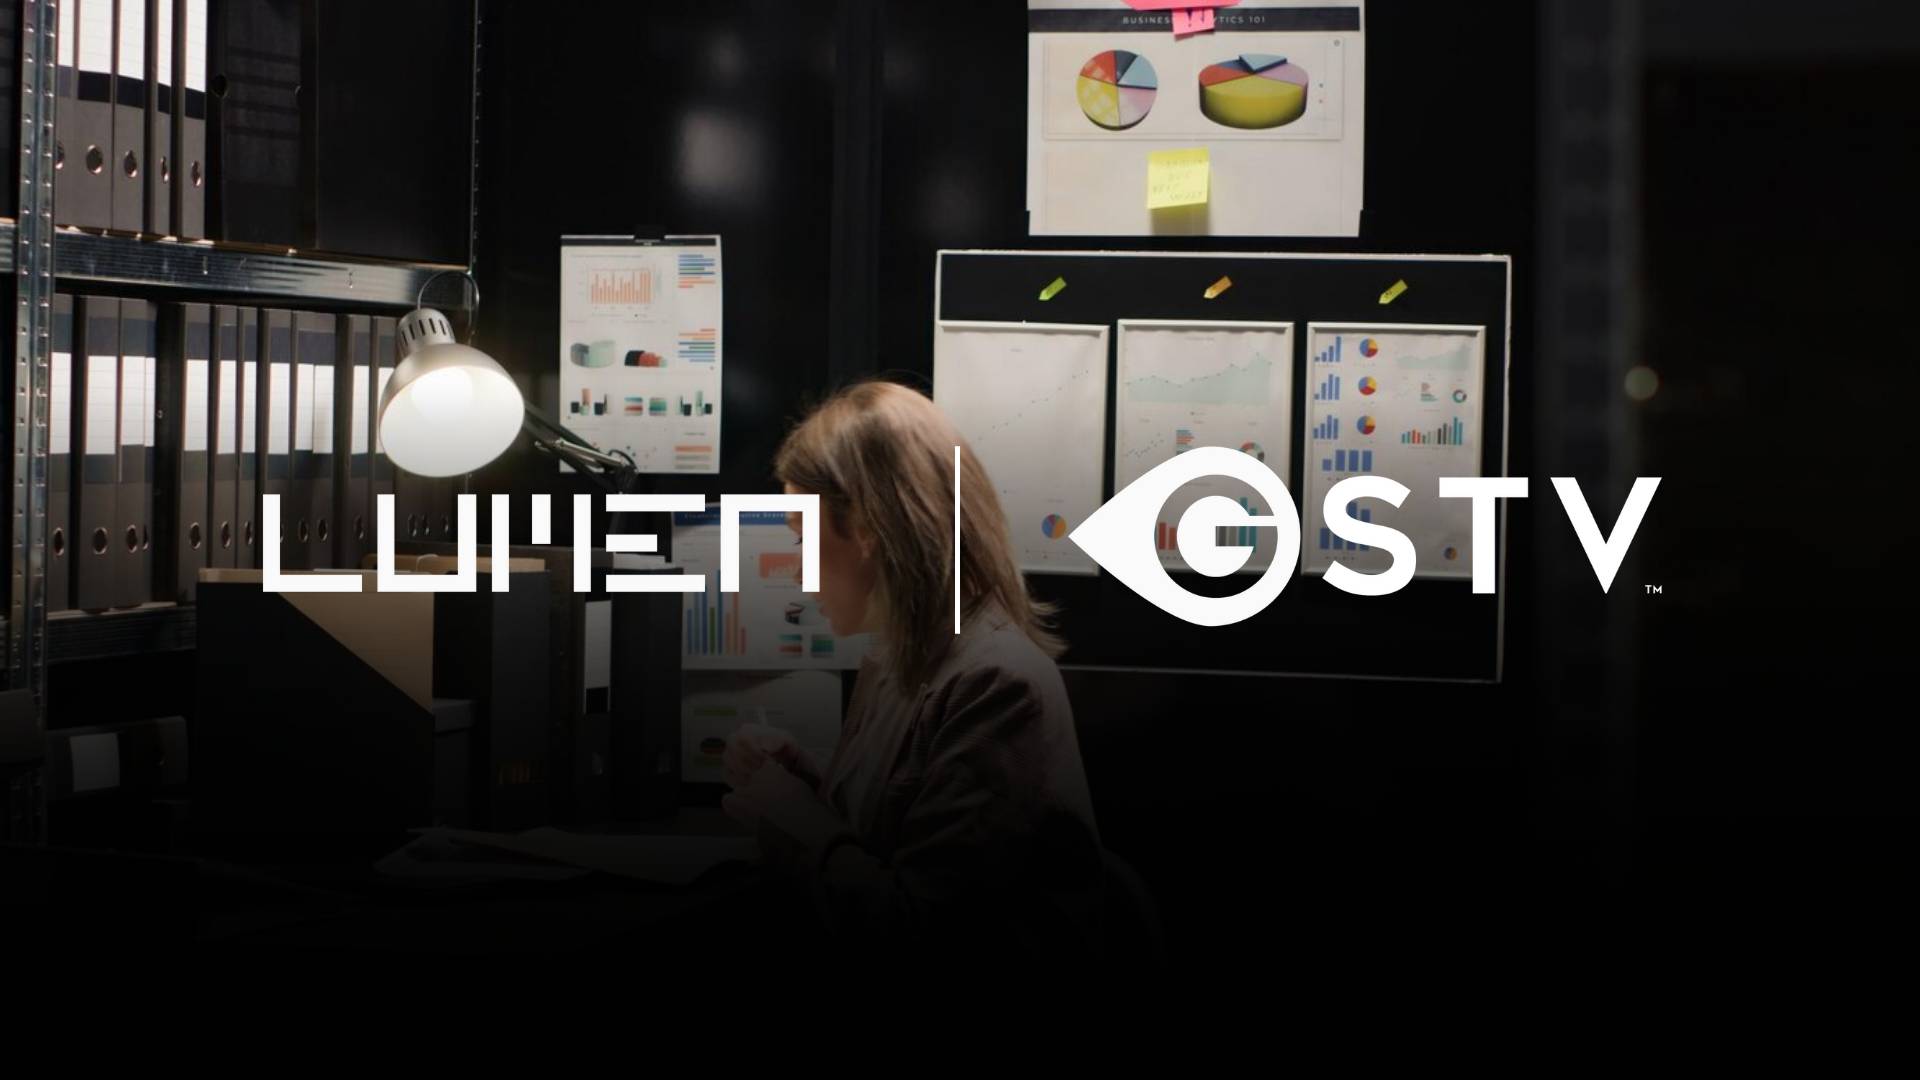 GSTV Study Reveals Exceptional Viewer Attention Surpassing Industry Norms